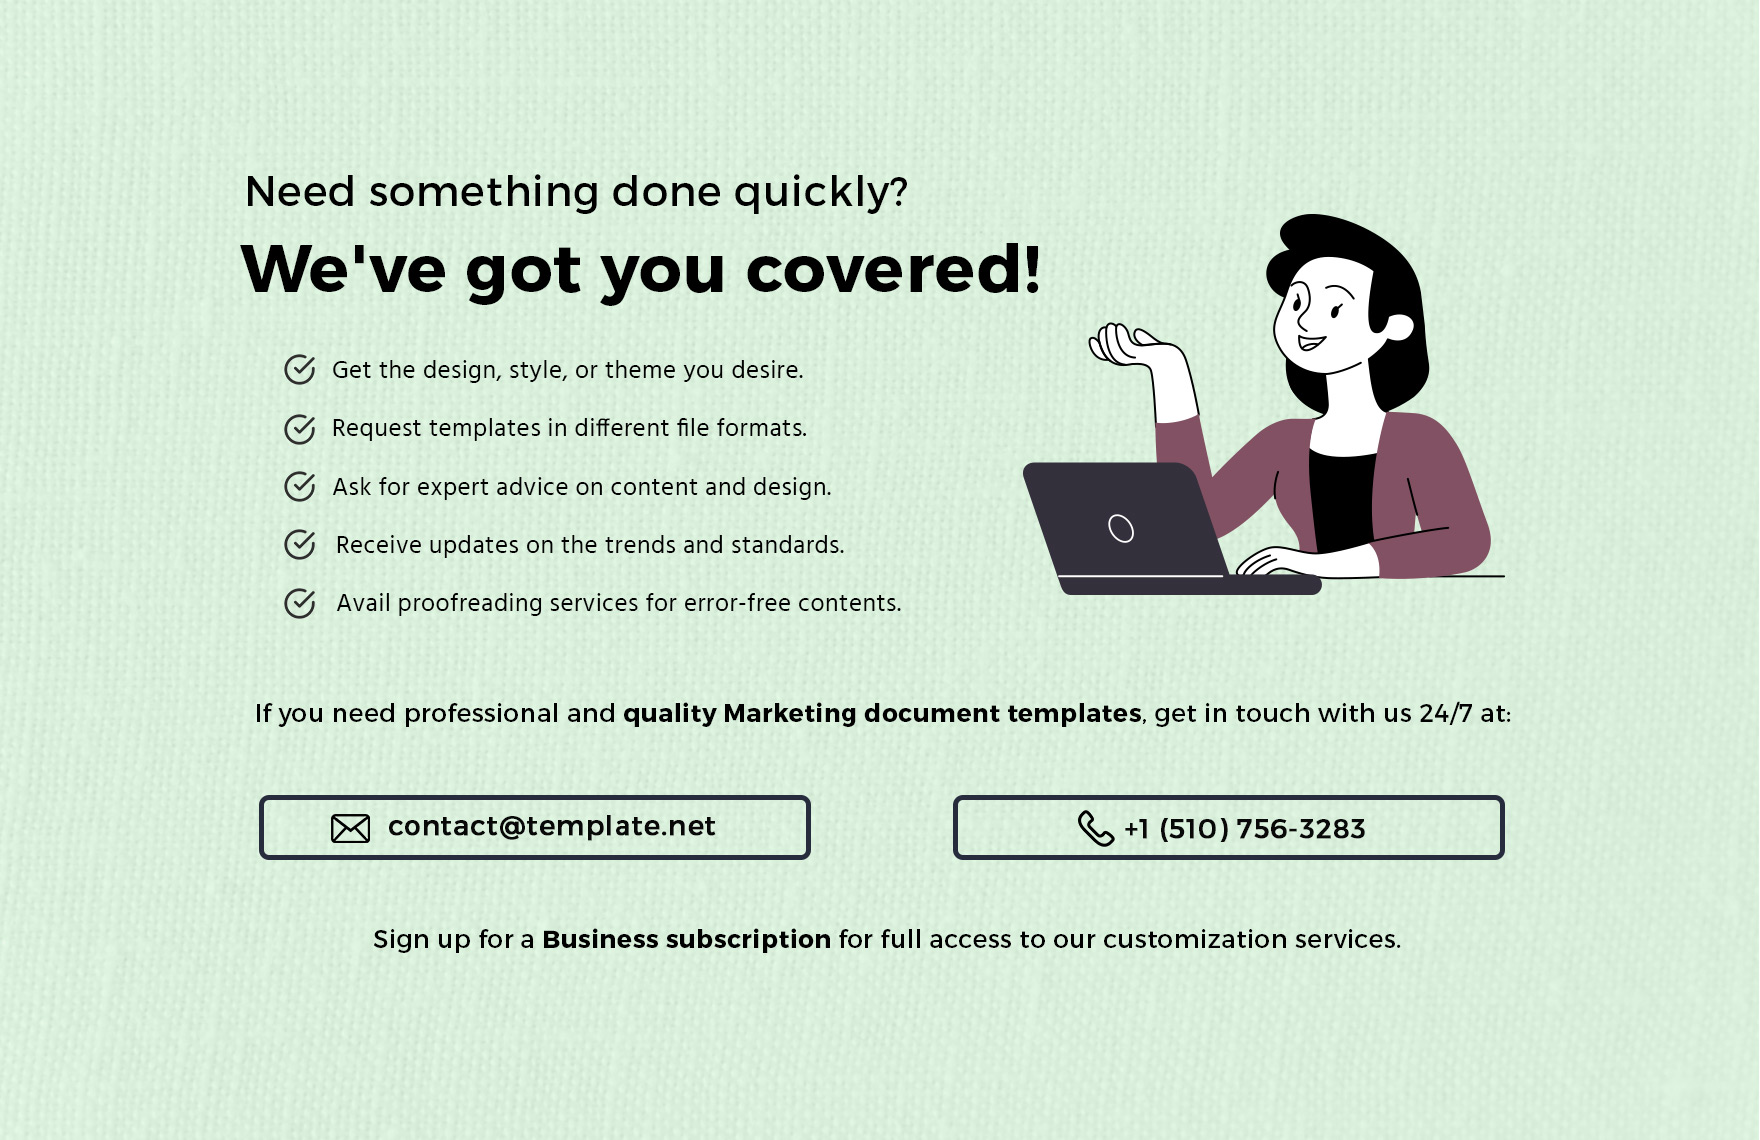 Marketing Traffic Source Compliance Document Template